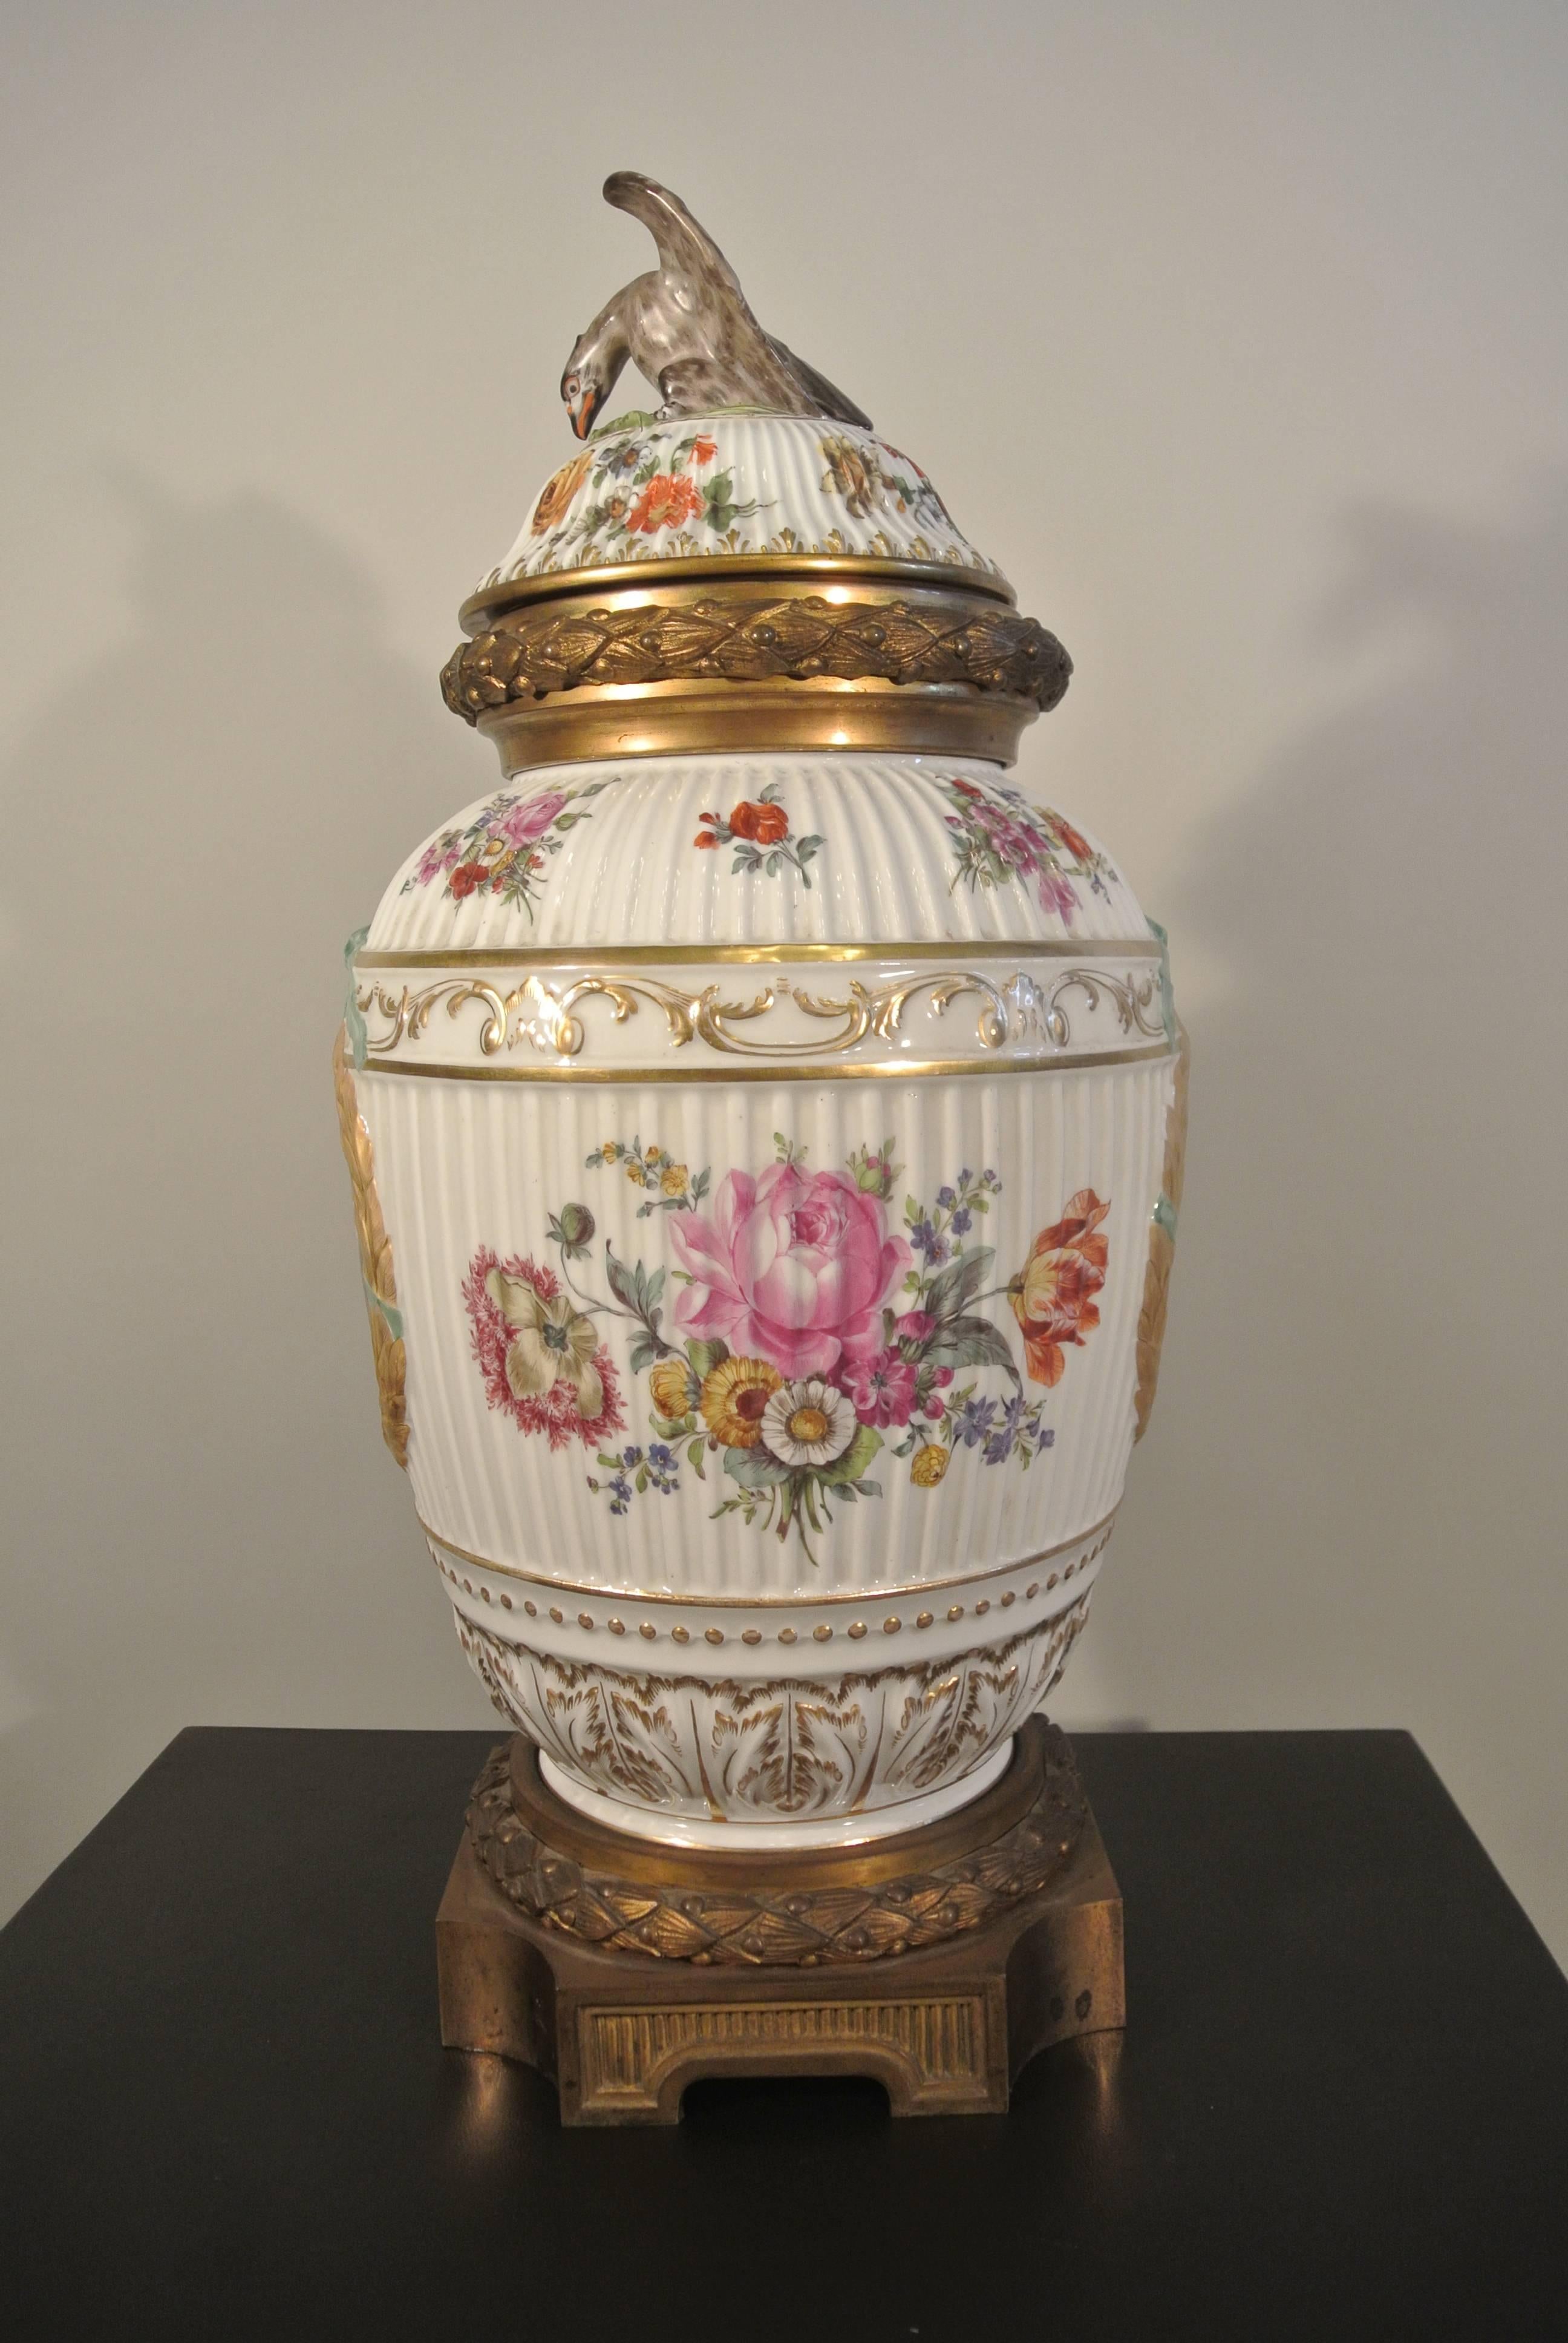 Covered porcelain bronze on gilded bronze base from the 19th century.
 